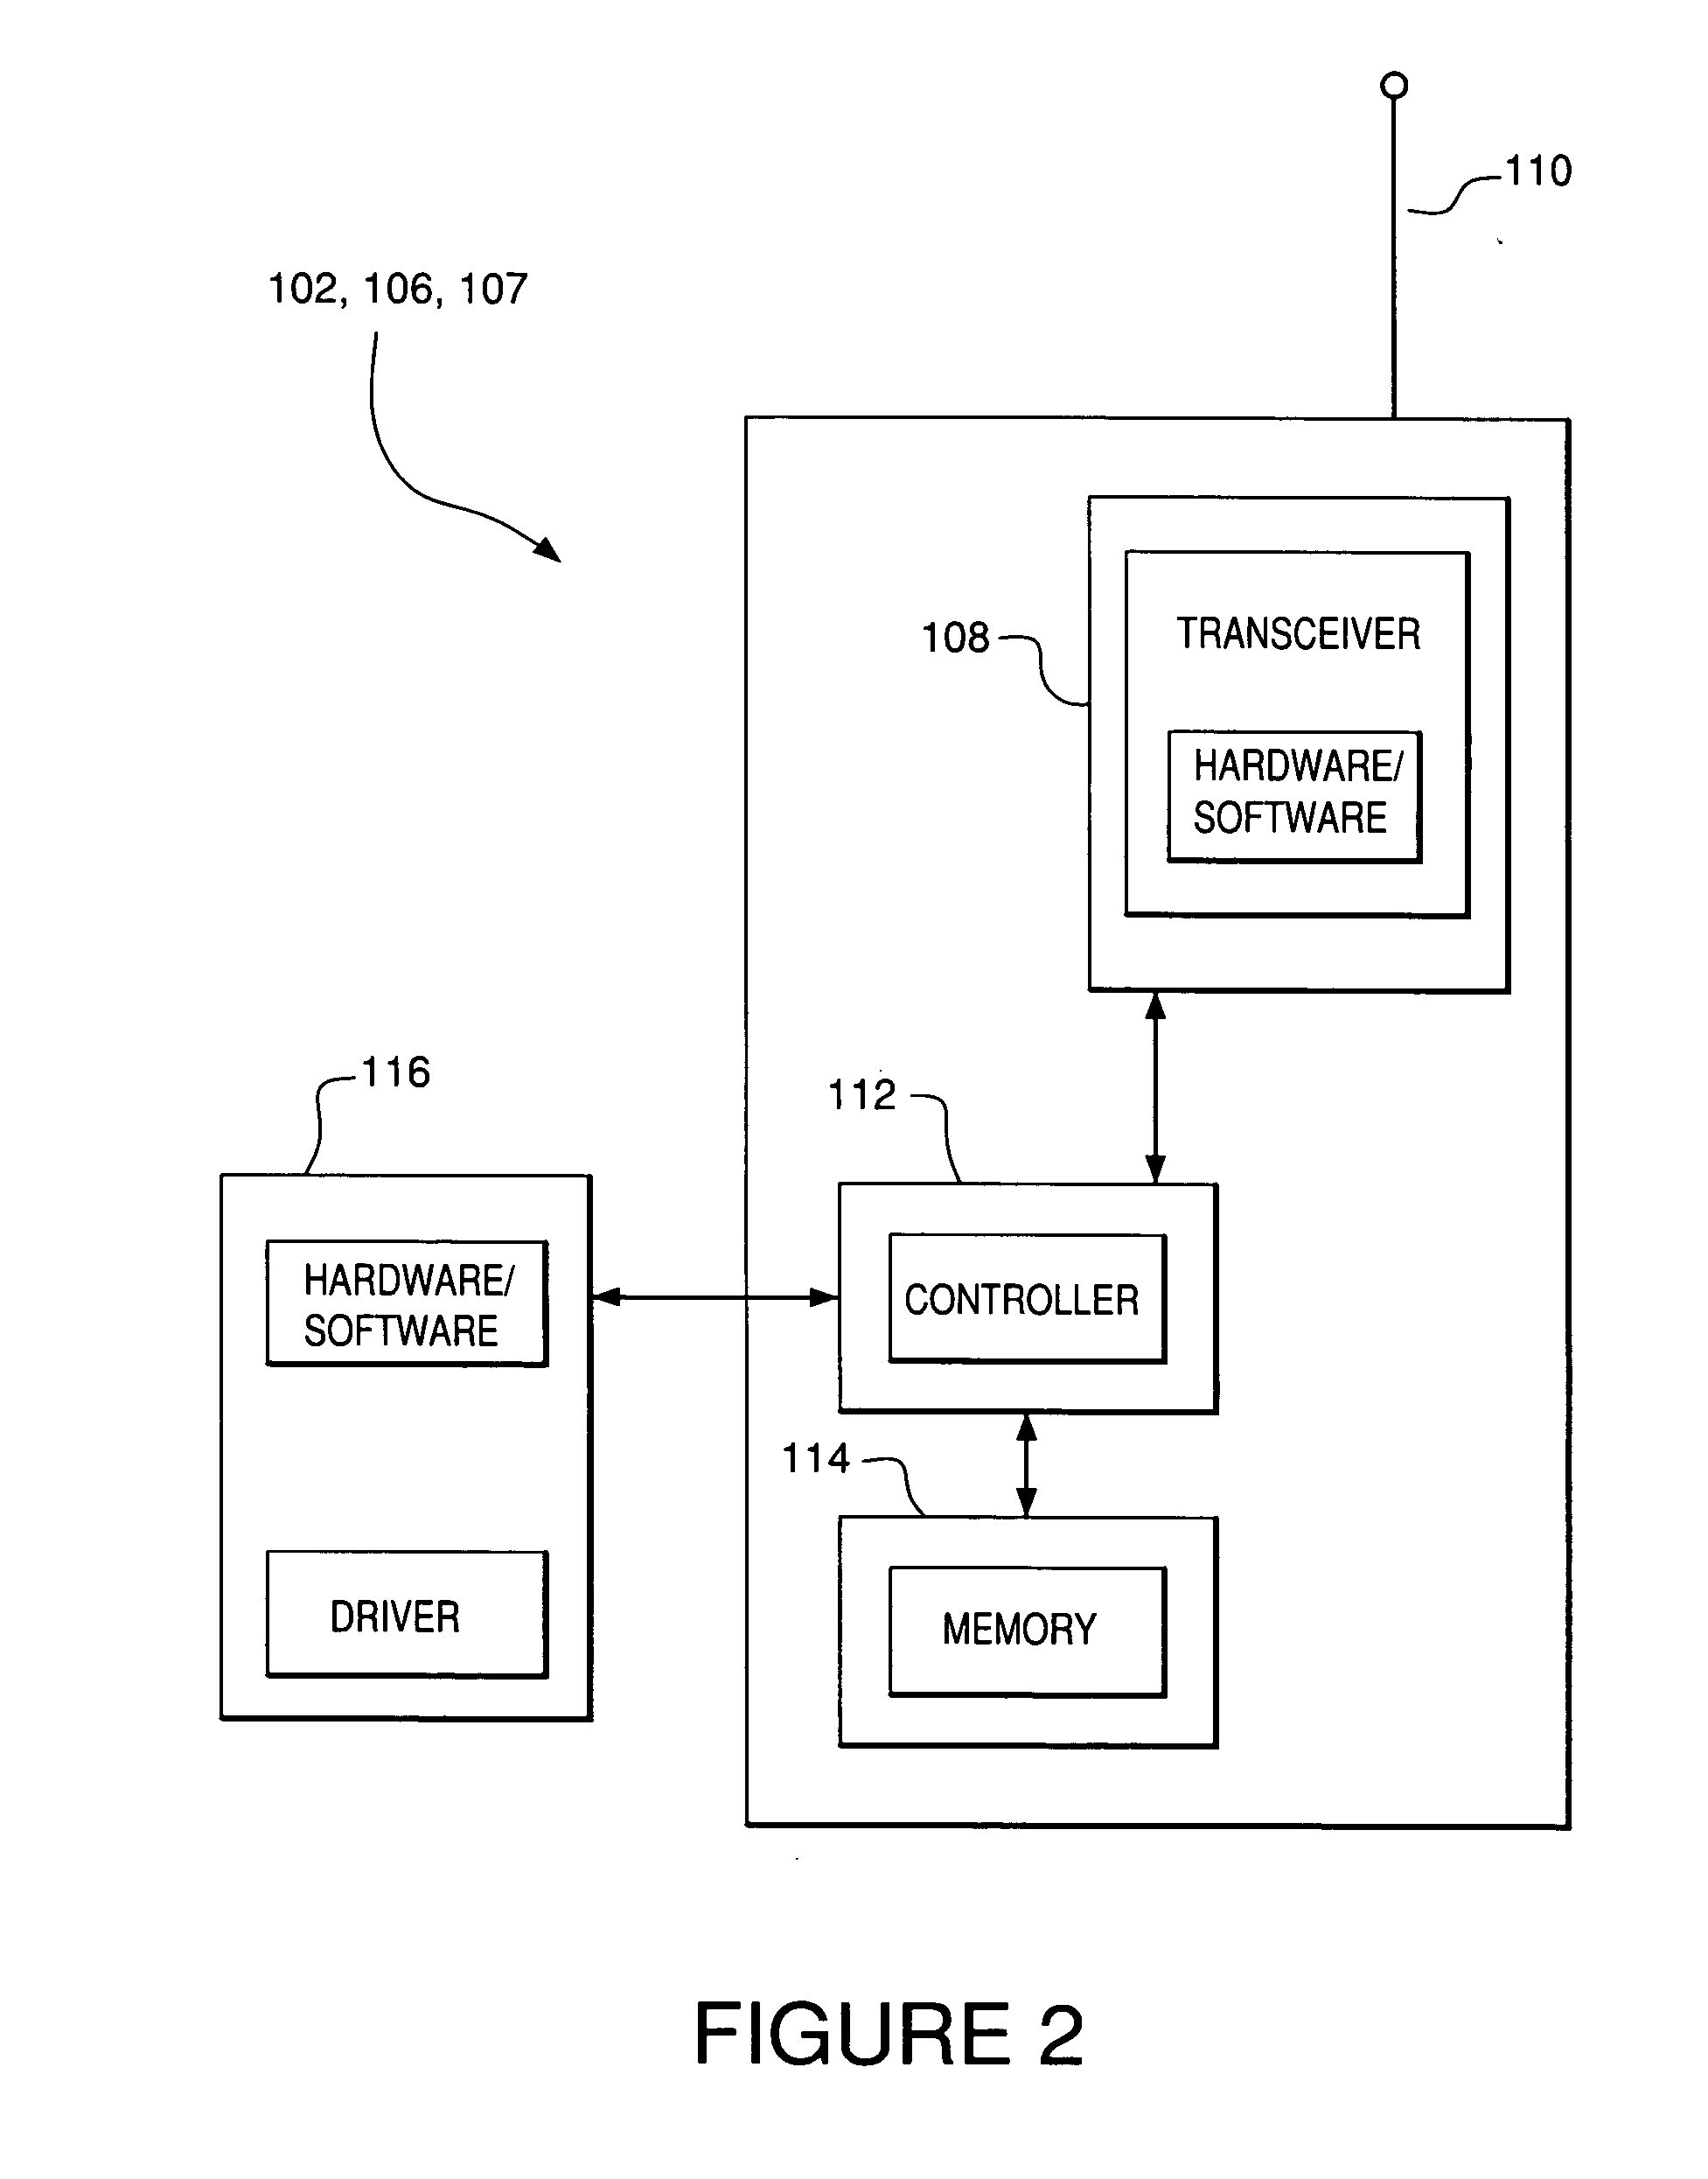 Method to support multicast routing in multi-hop wireless networks